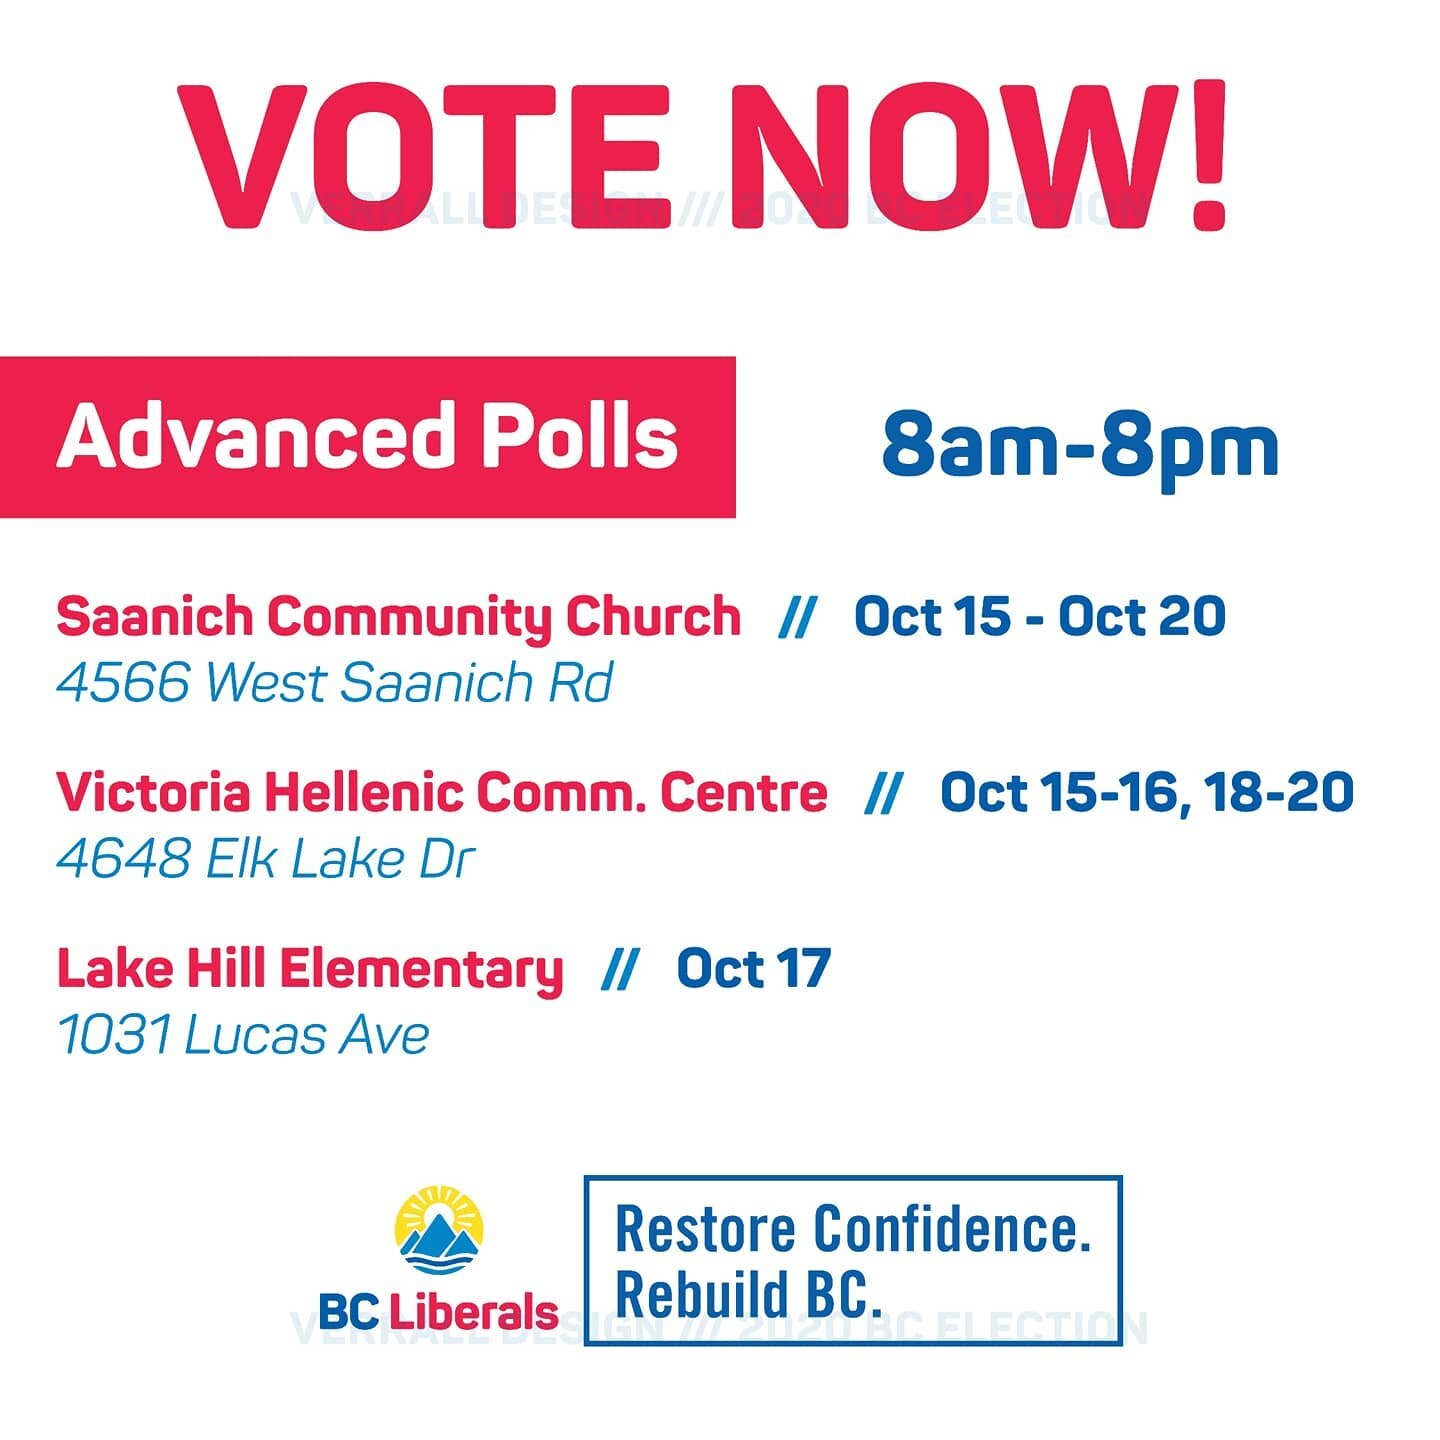 A GOTV graphic encouraging Saanich voters to vote in advanced polls.
...
Over the coming days, I'll be highlighting work done during 2020 BC Election.
...
...
@bcliberals @wilkinson4bc @rishisharmasaanich @rssharmahome #bcpoli #politics #campaign #ca